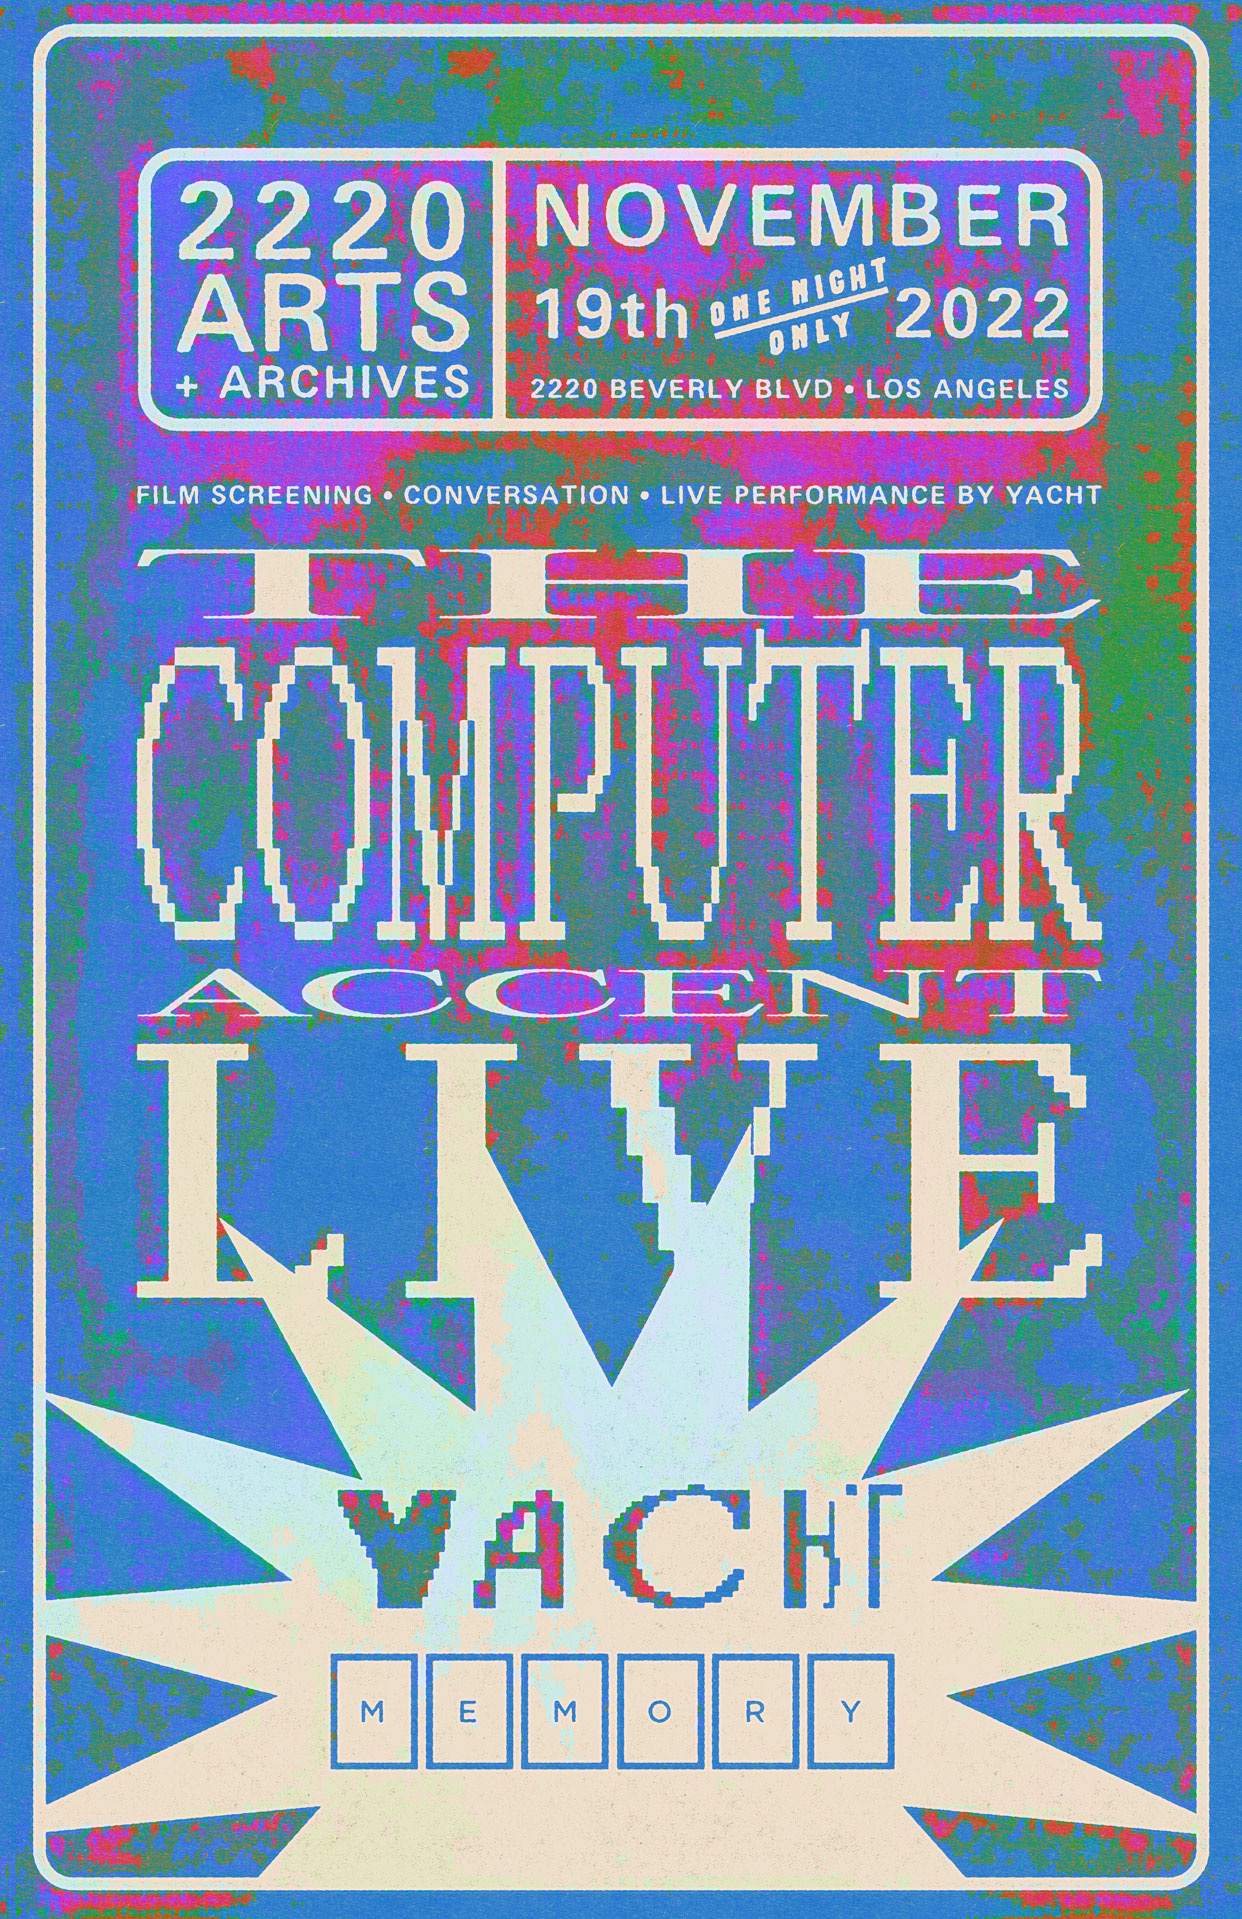 YACHT: The Computer Accent (Live + Film Screening) - Página frontal